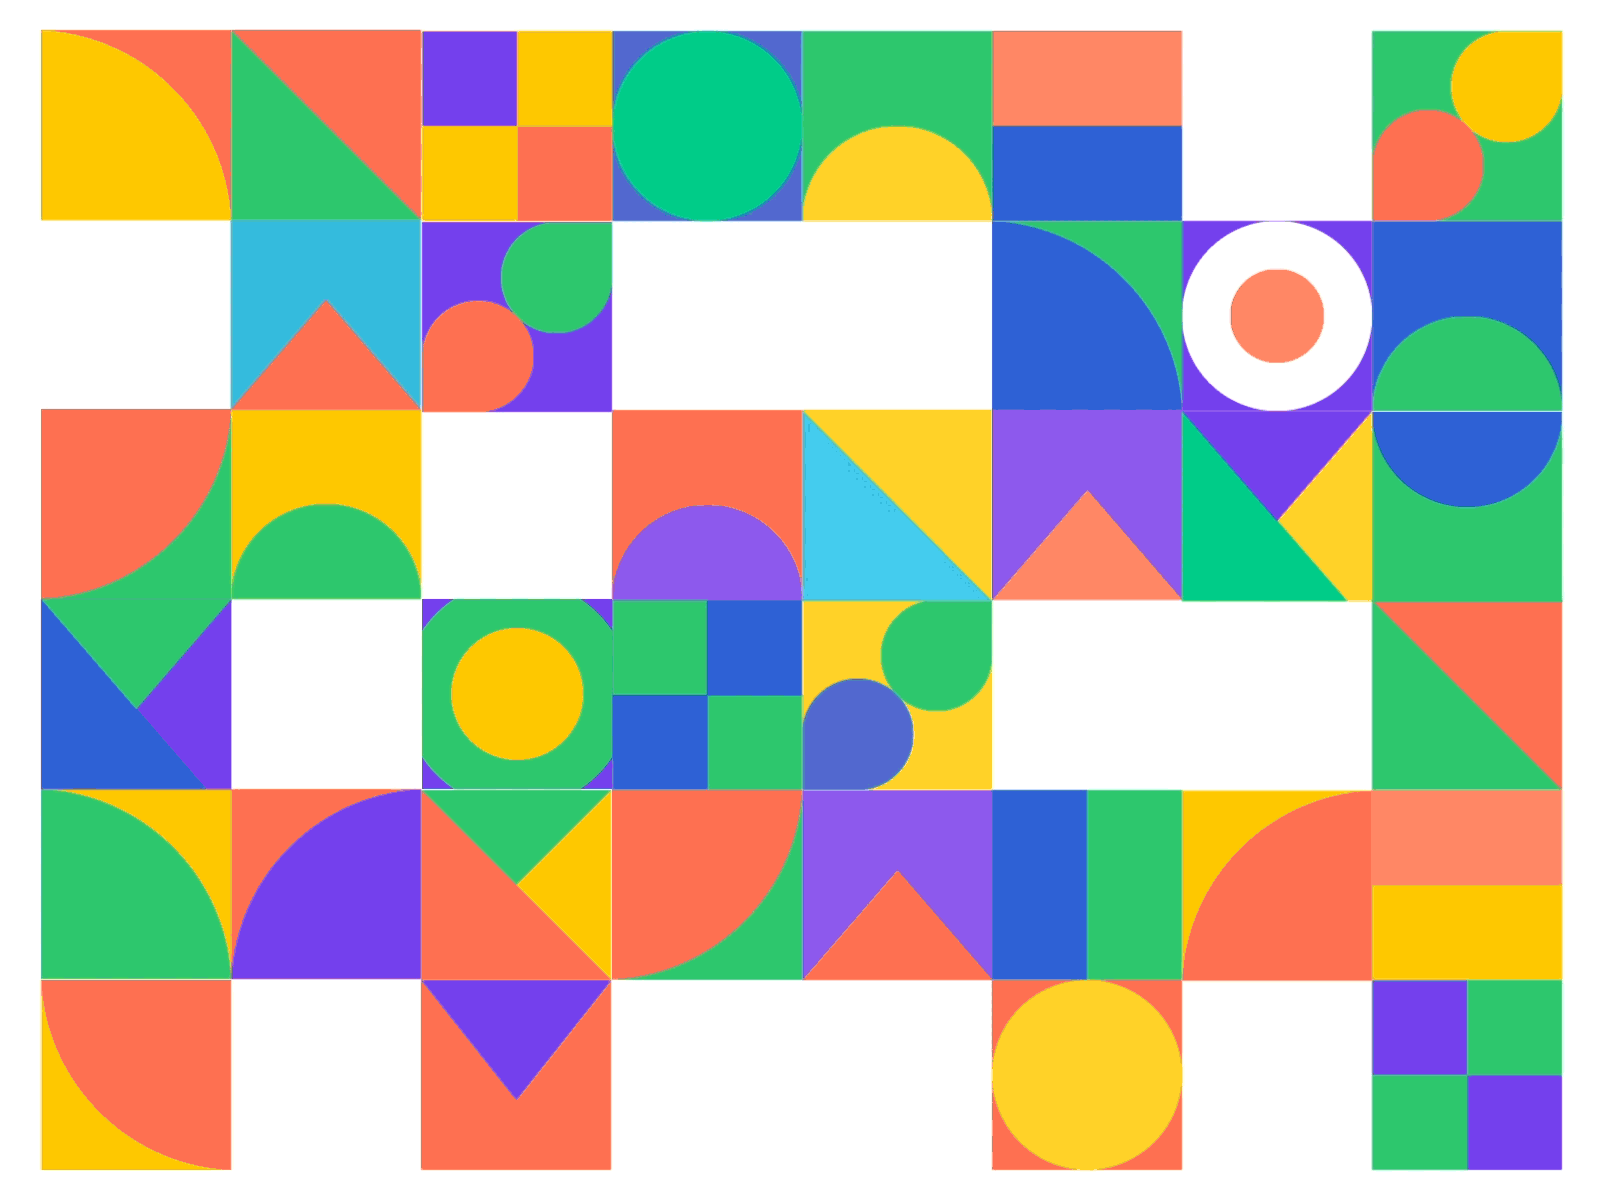 Just playing with shapes